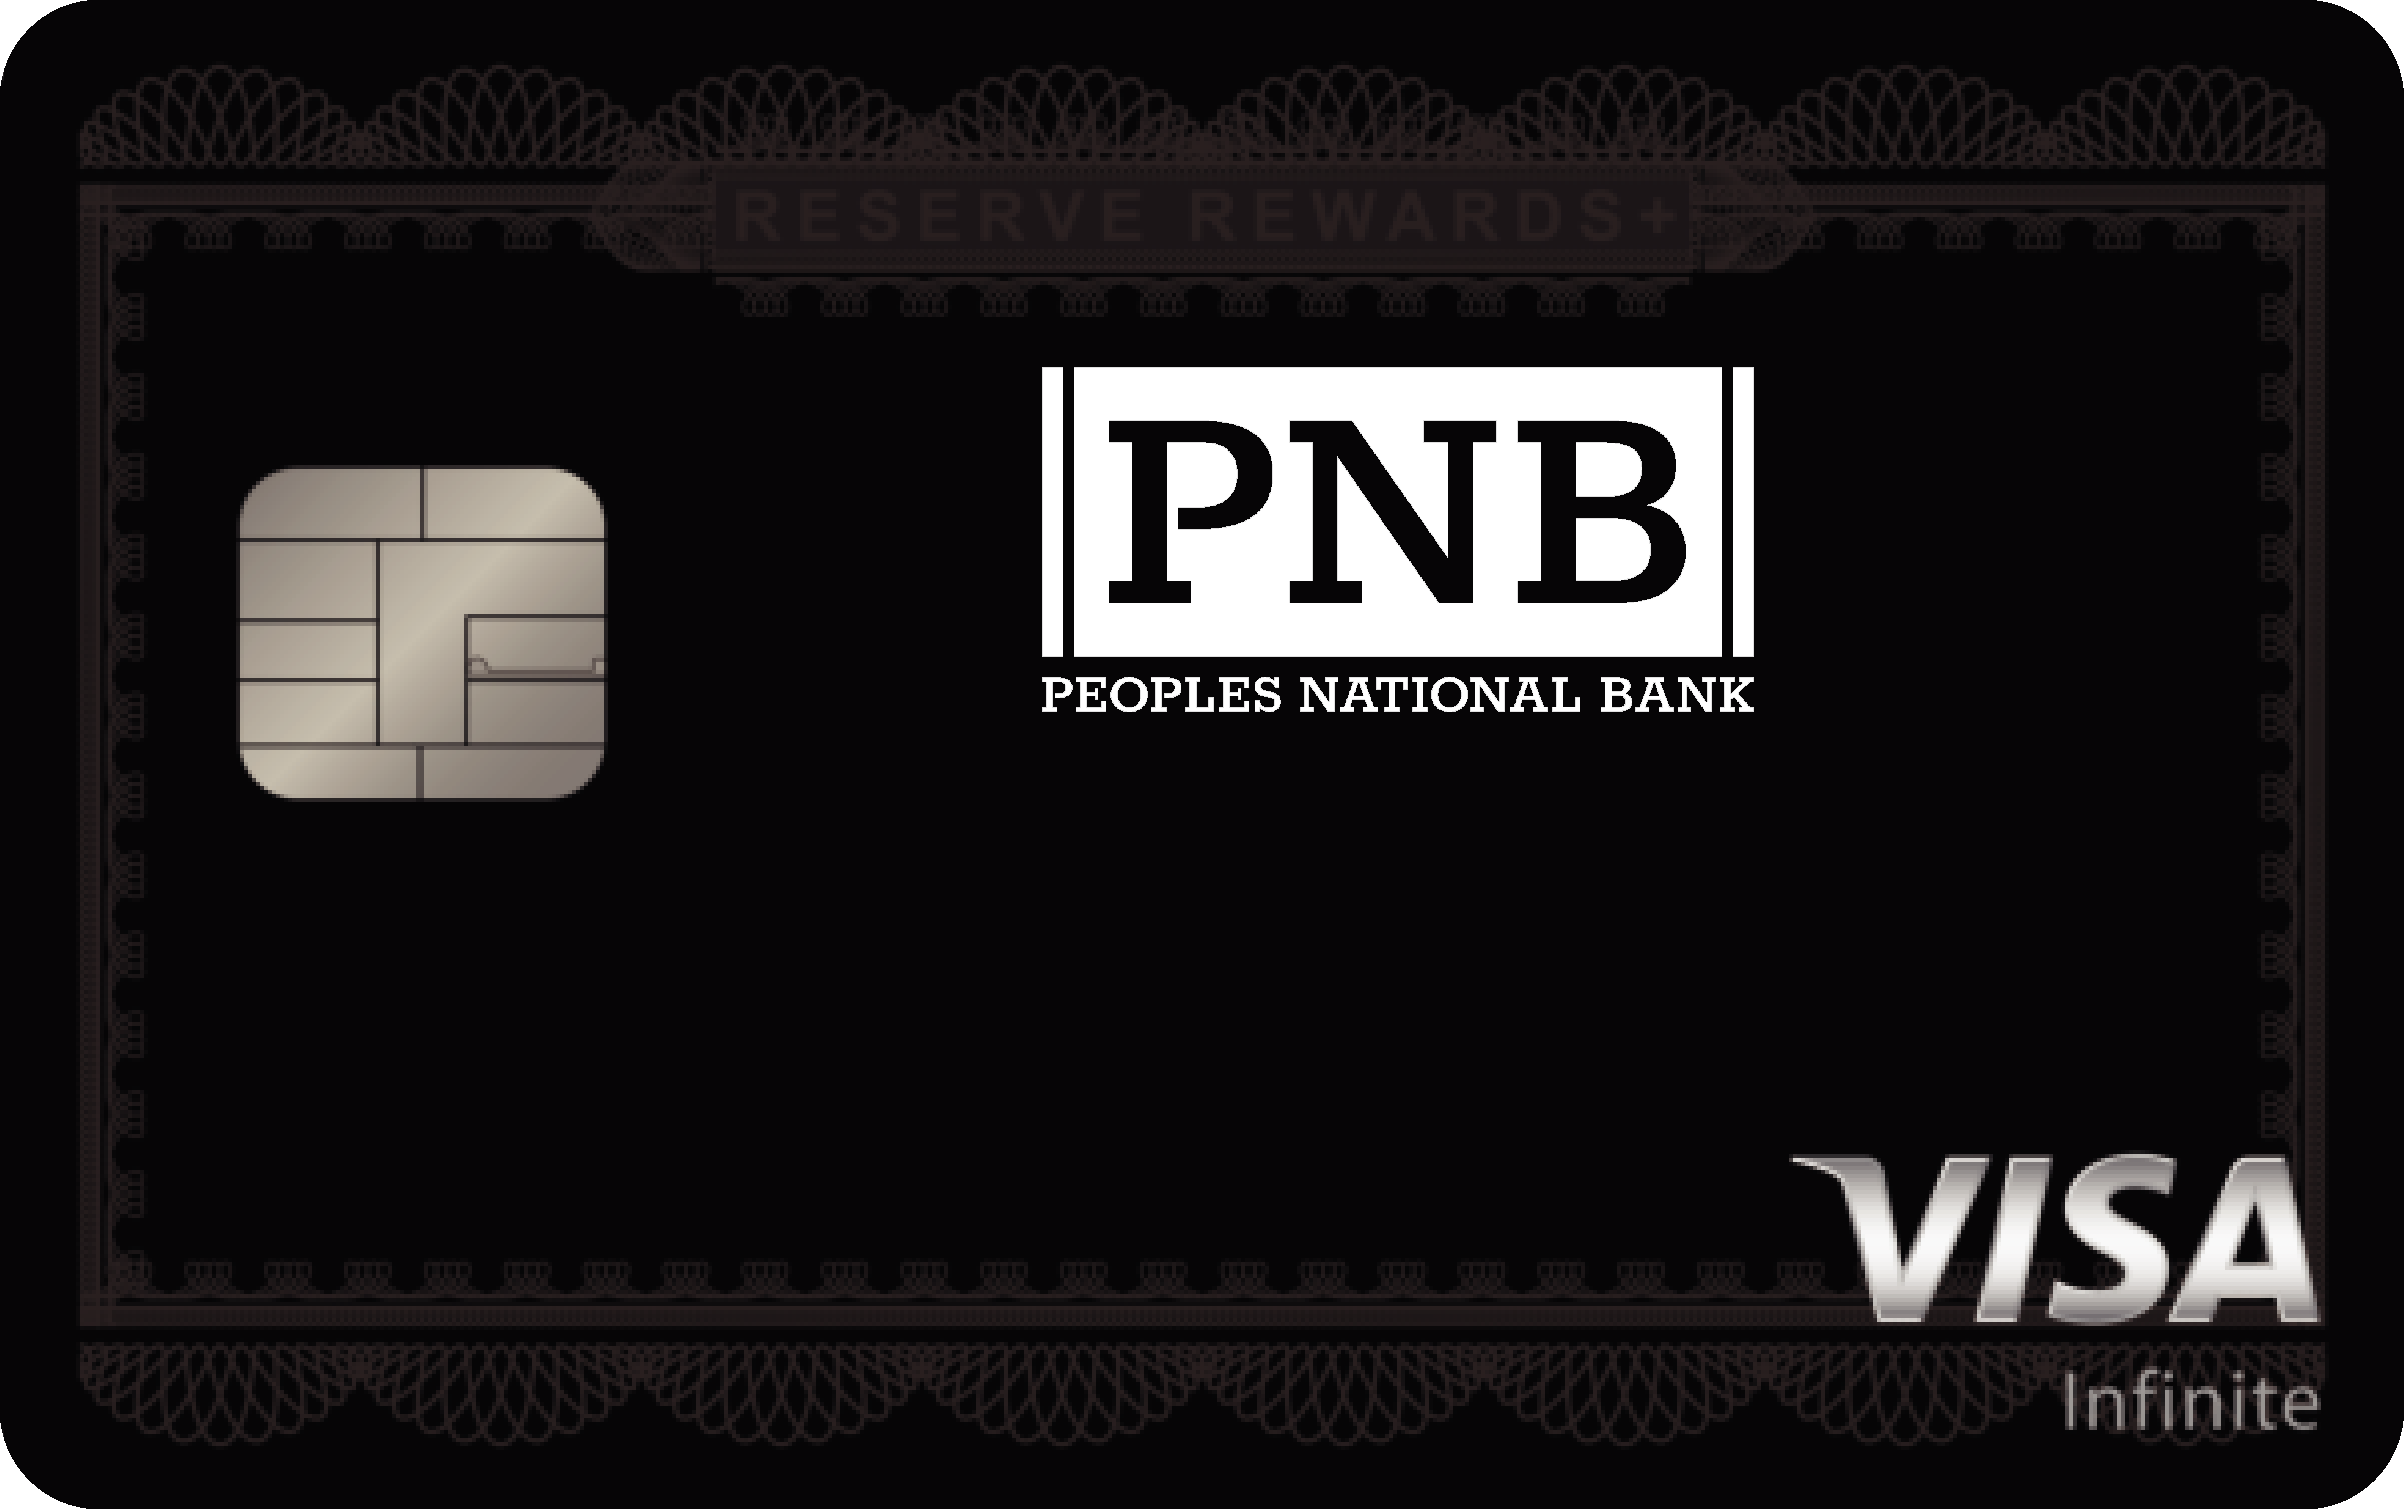 Peoples National Bank